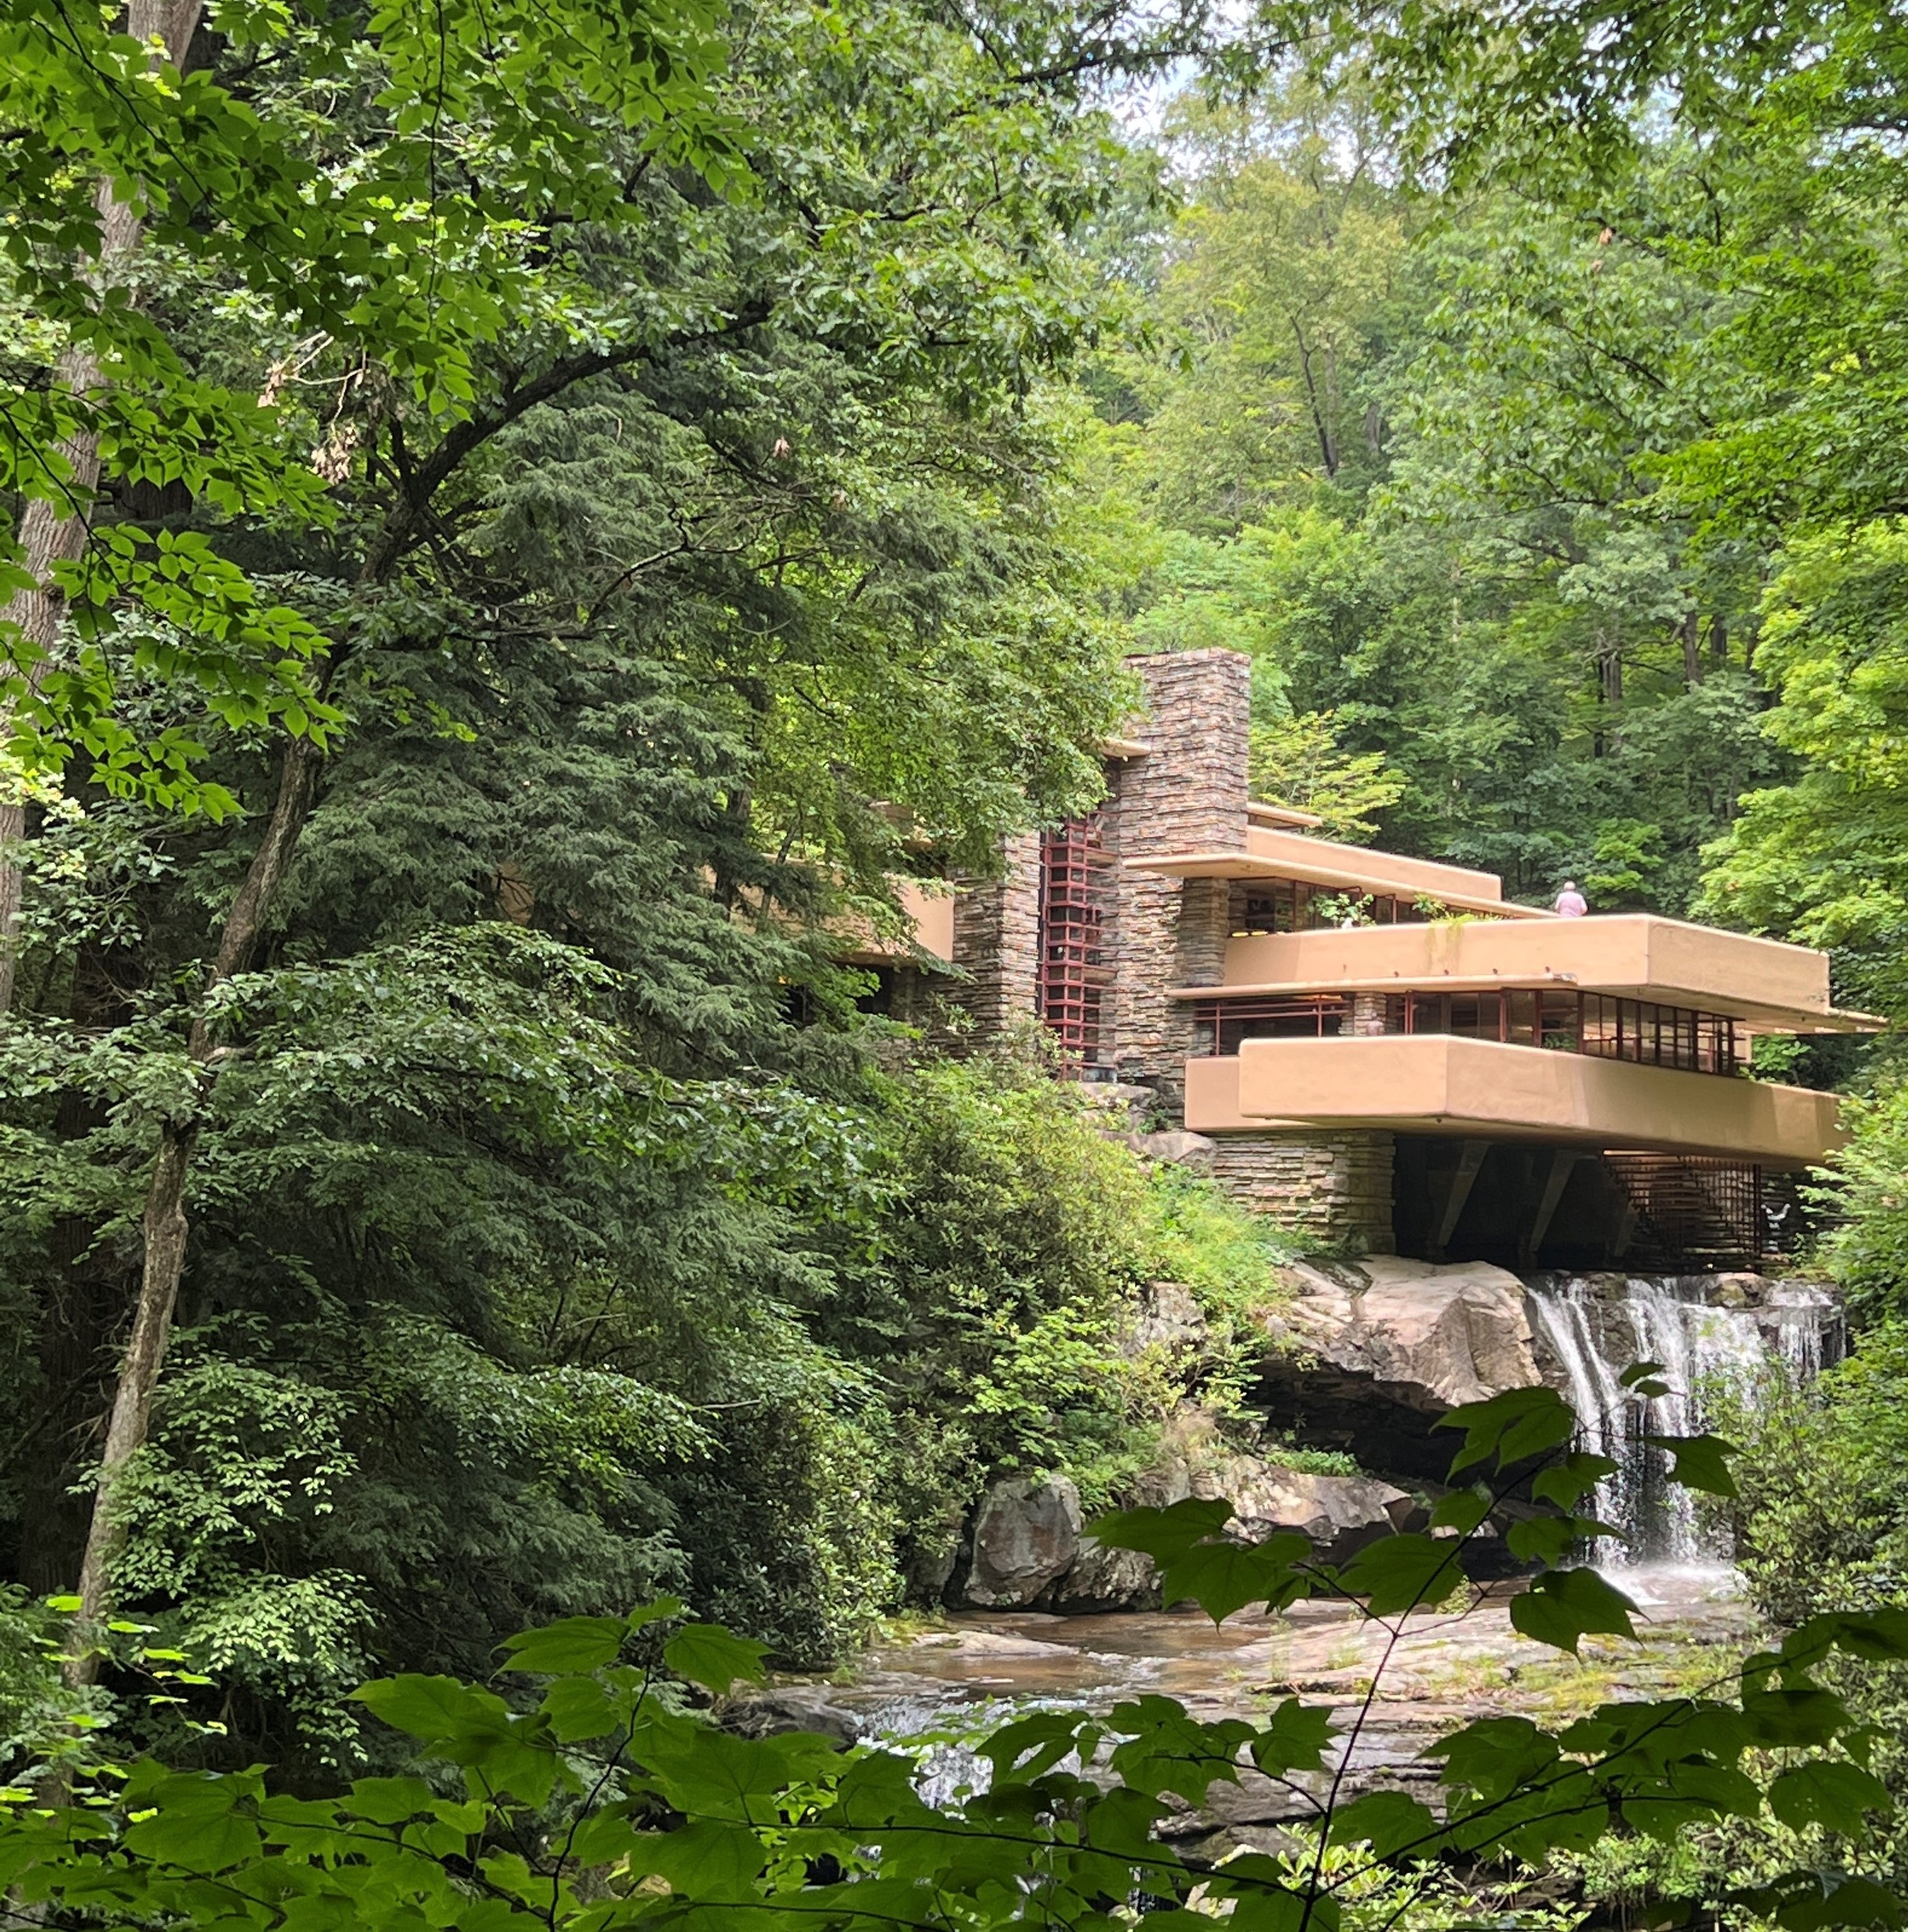 Student photo of FallingWater on student trip.